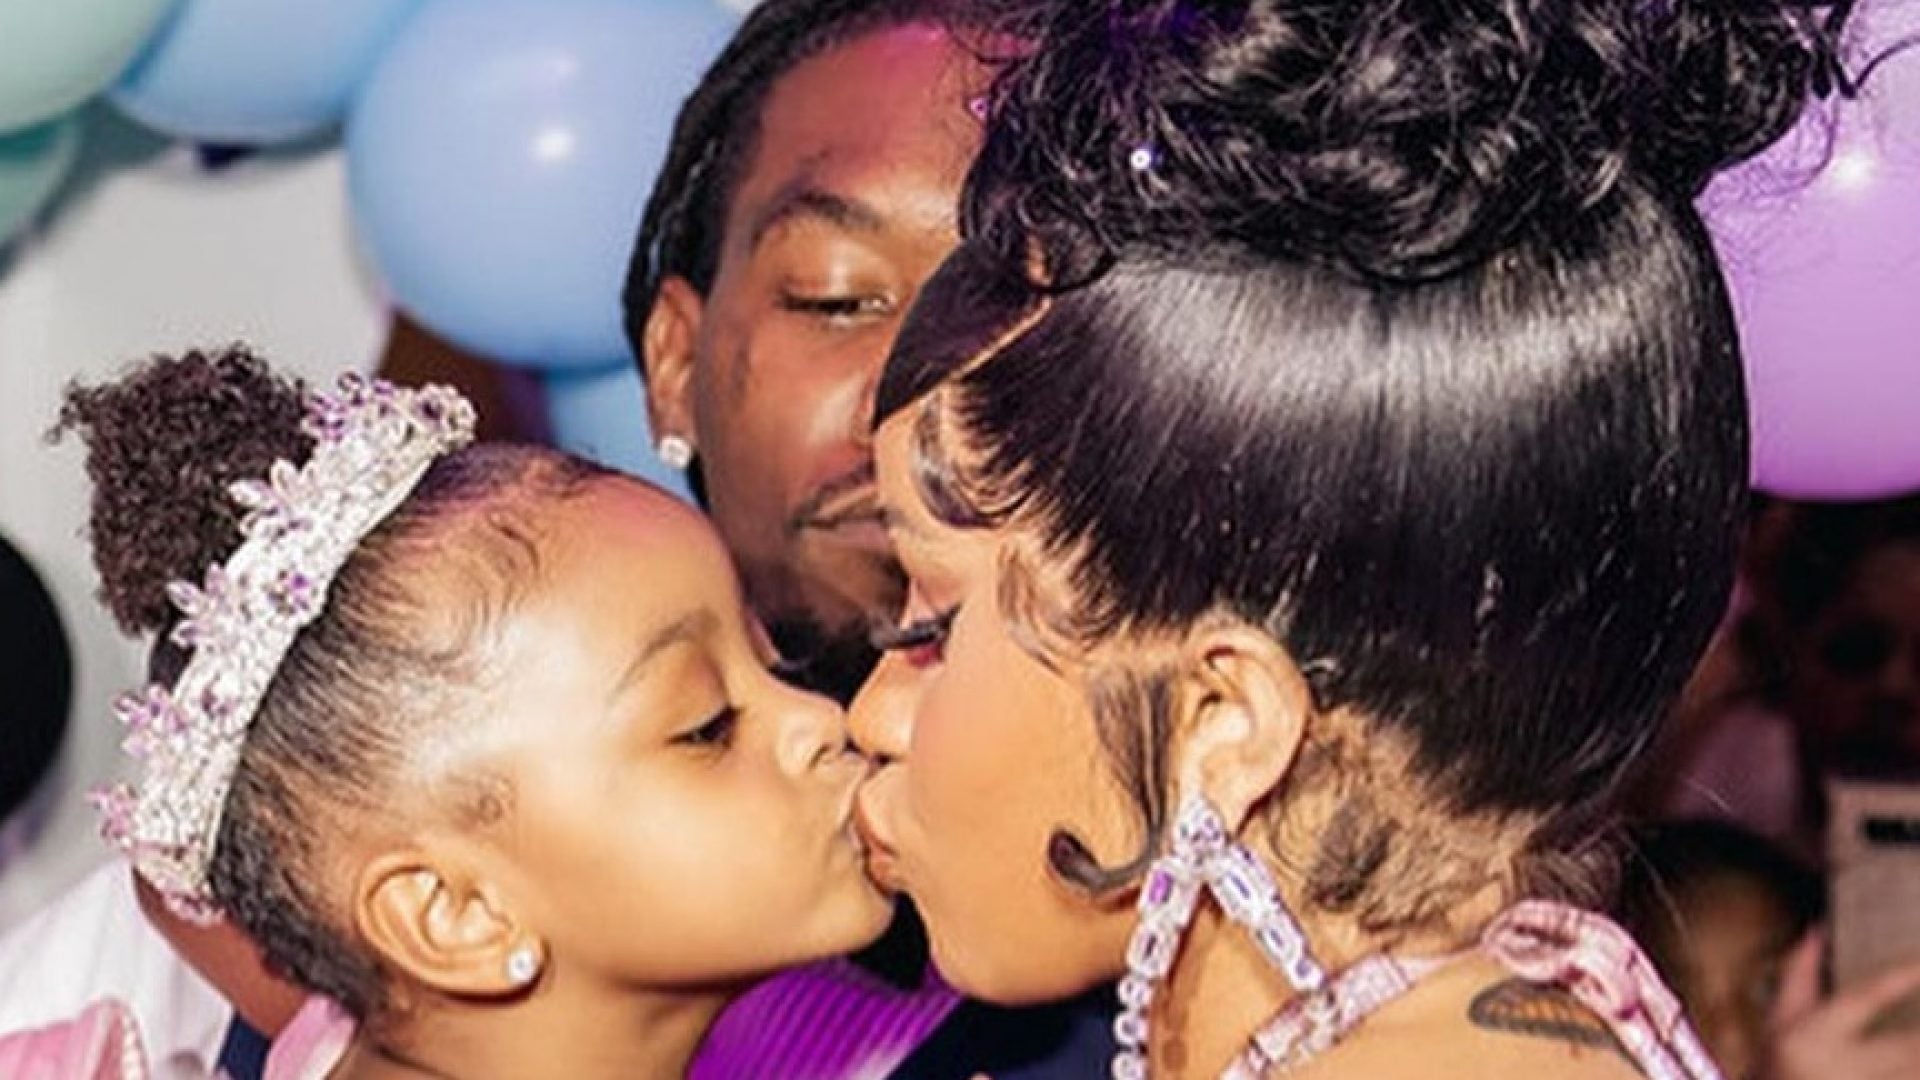 Check Out The Princess-Themed Birthday Party Cardi B Threw For Her Daughter